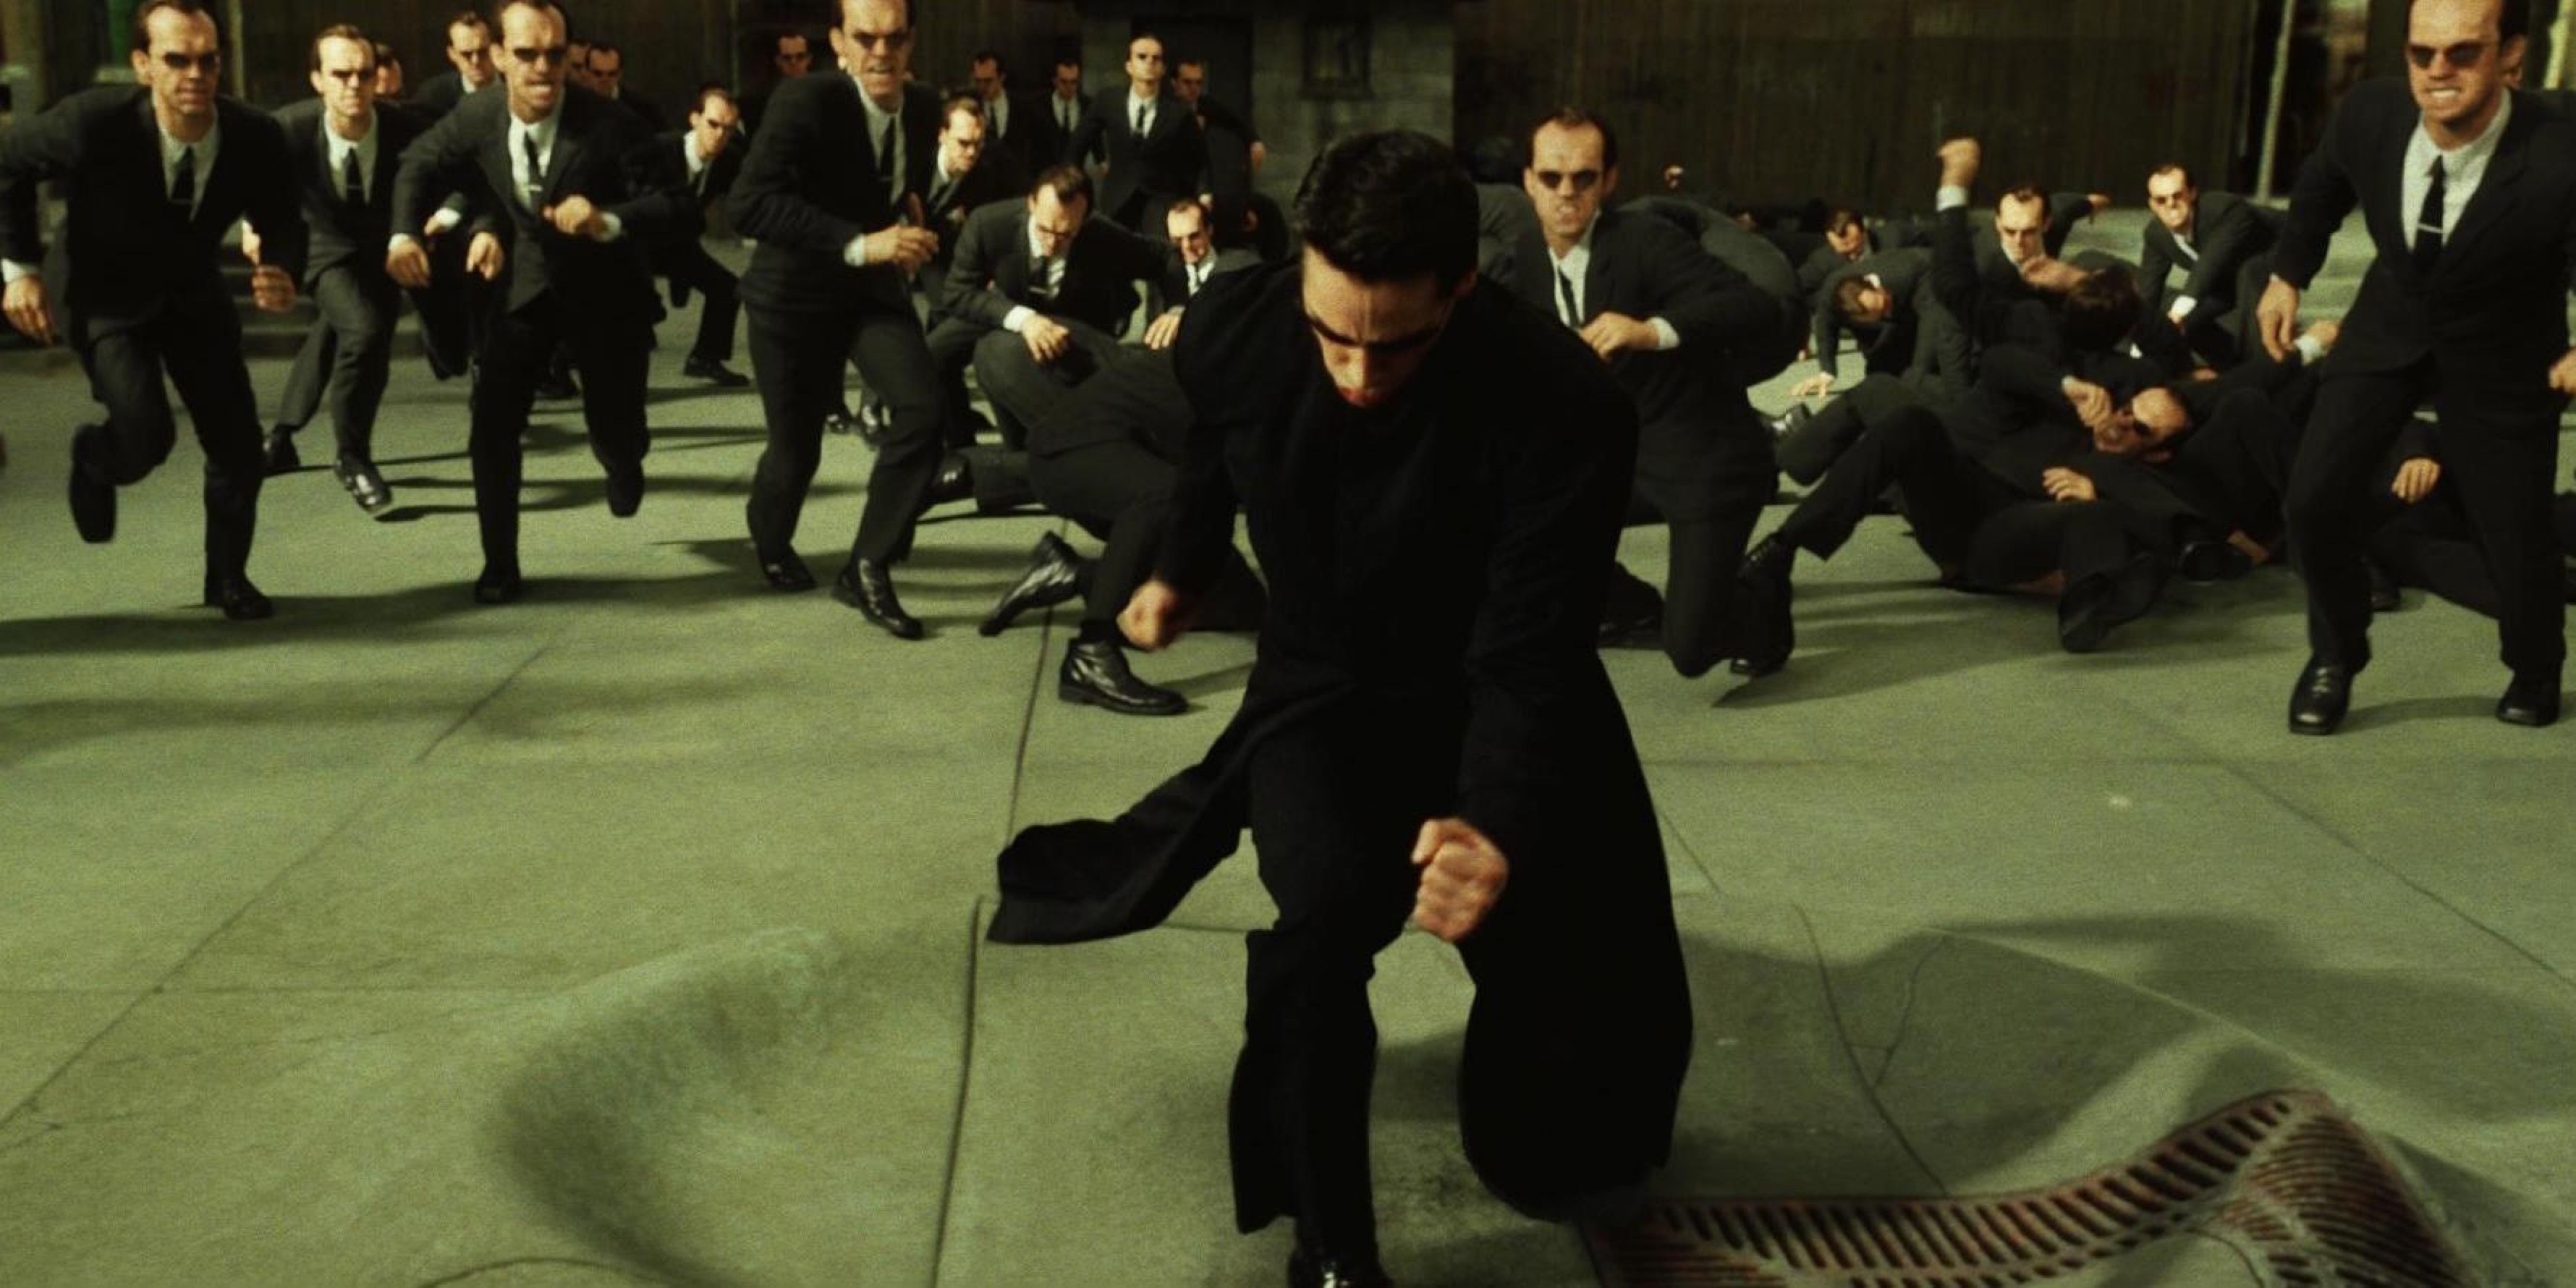 Neo fights dozens of Agents Smith in The Matrix Reloaded